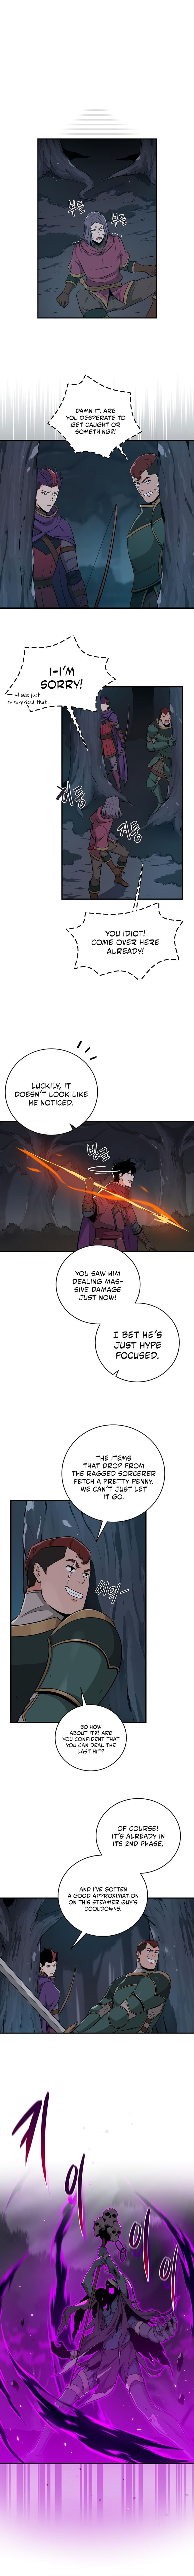 Archmage Streamer - Chapter 21 Page 4